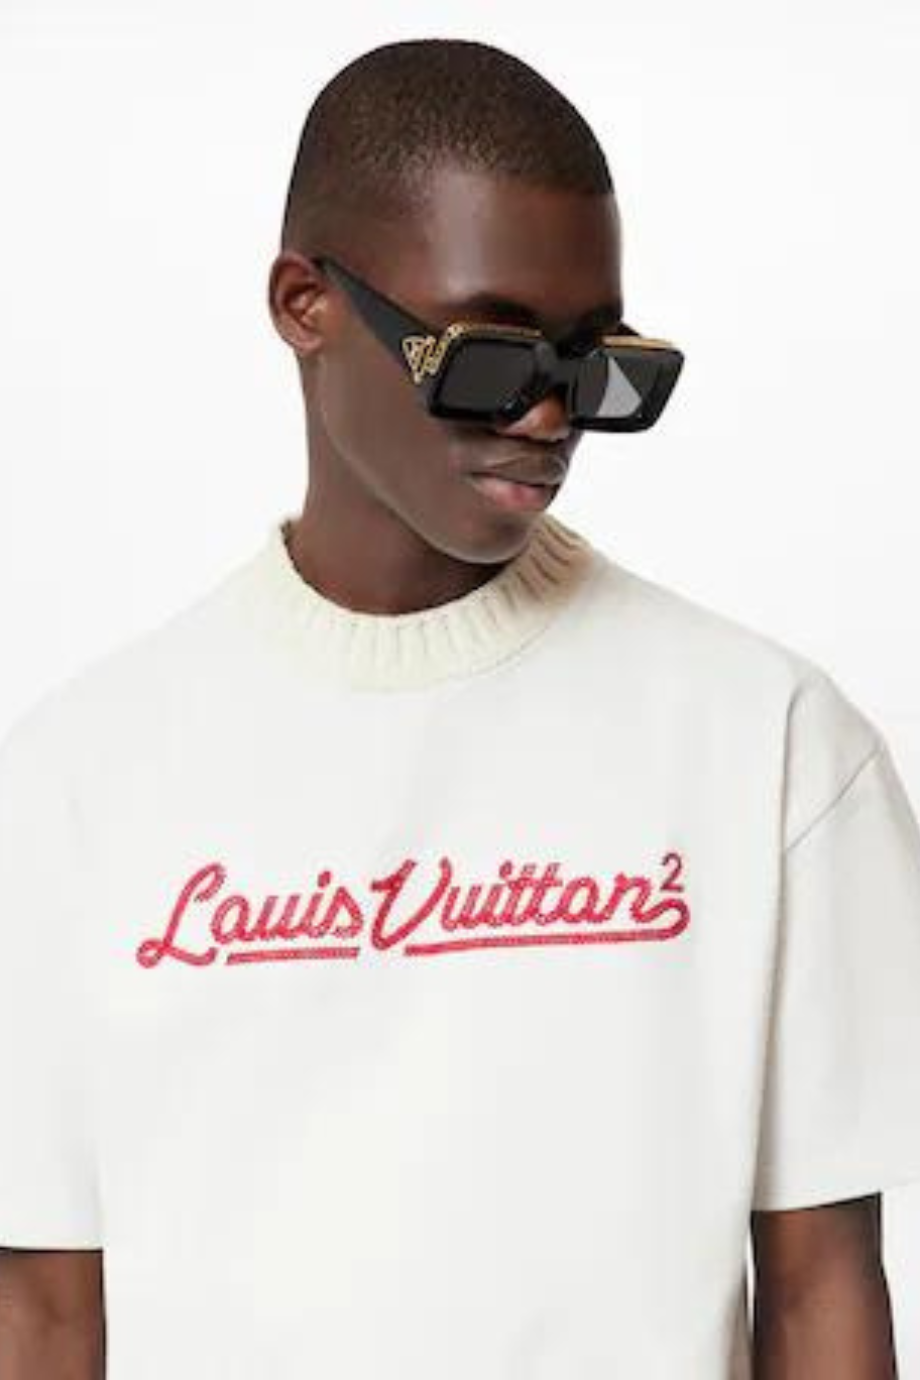 EMBROIDERED LOUIS VUITTON MOCKNECK TEE